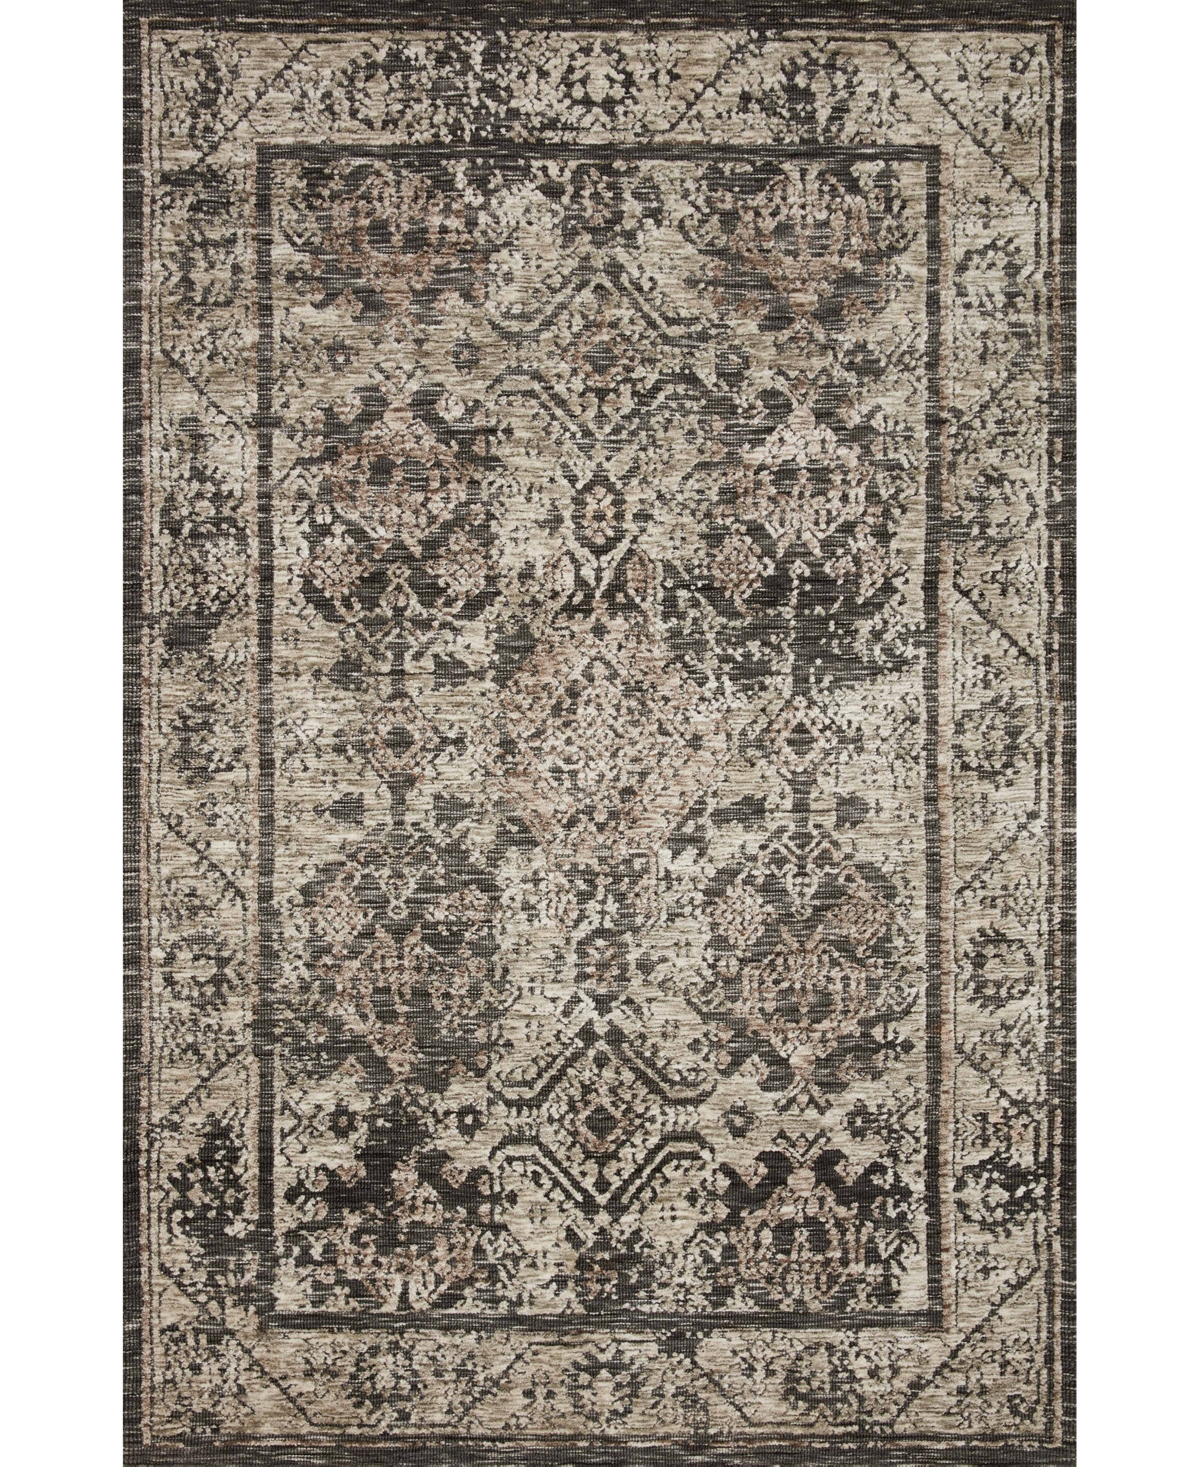 Magnolia Home By Joanna Gaines X Loloi Lindsay Lis-04 2'3" X 3'9" Area Rug In Charcoal